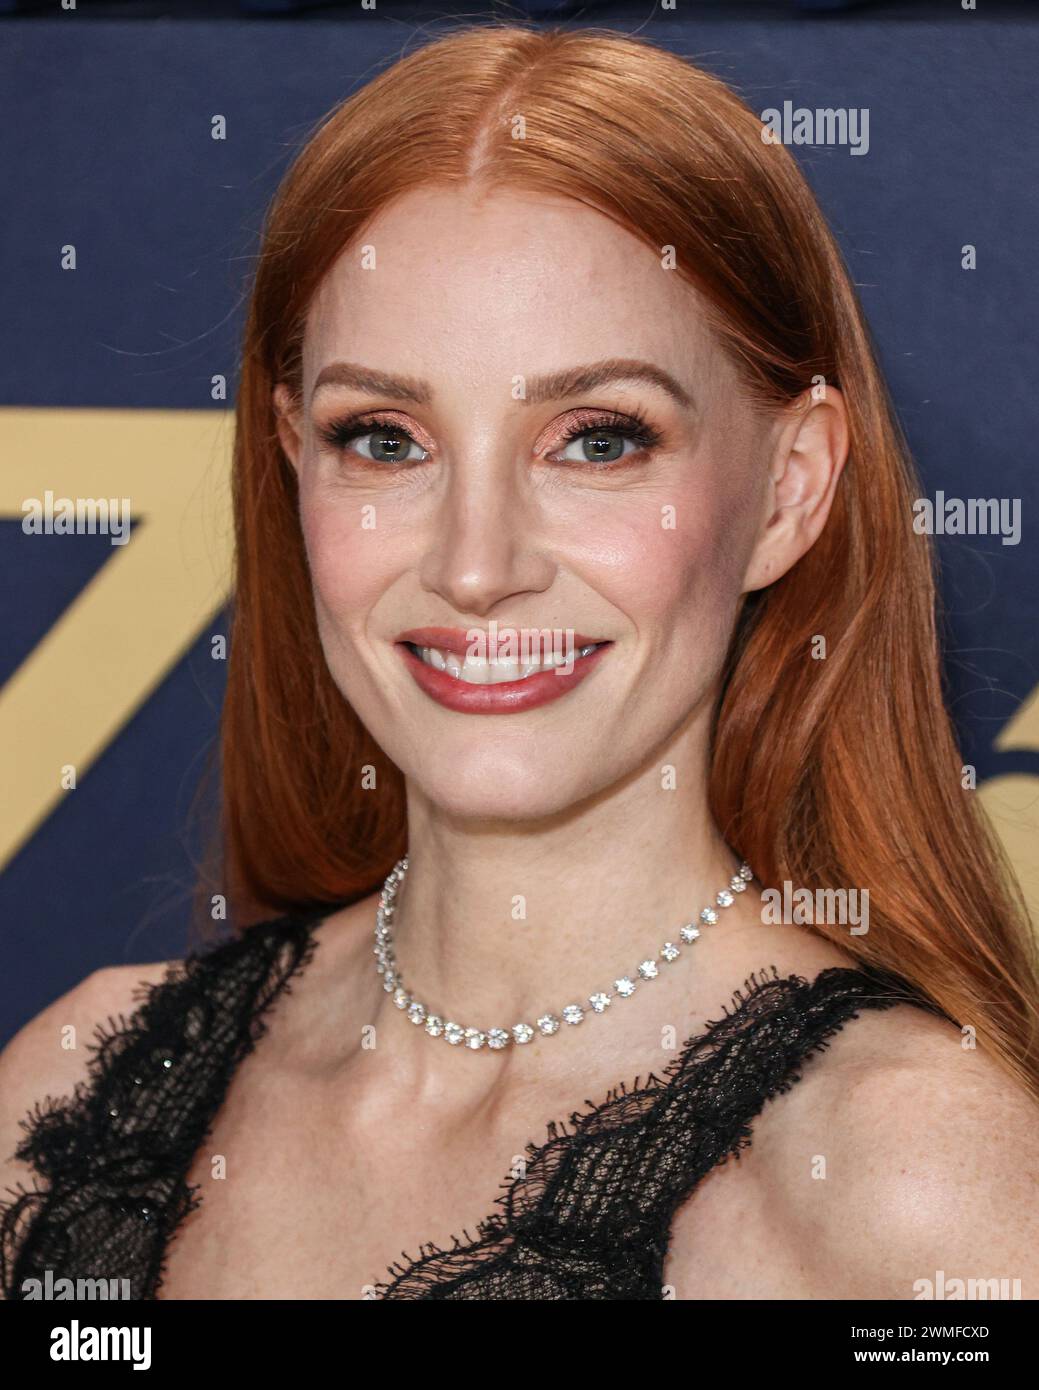 LOS ANGELES, CALIFORNIA, USA - FEBRUARY 24: Jessica Chastain wearing a custom Armani dress and DeBeers jewelry arrives at the 30th Annual Screen Actors Guild Awards held at the Shrine Auditorium and Expo Hall on February 24, 2024 in Los Angeles, California, United States. (Photo by Xavier Collin/Image Press Agency) Stock Photo